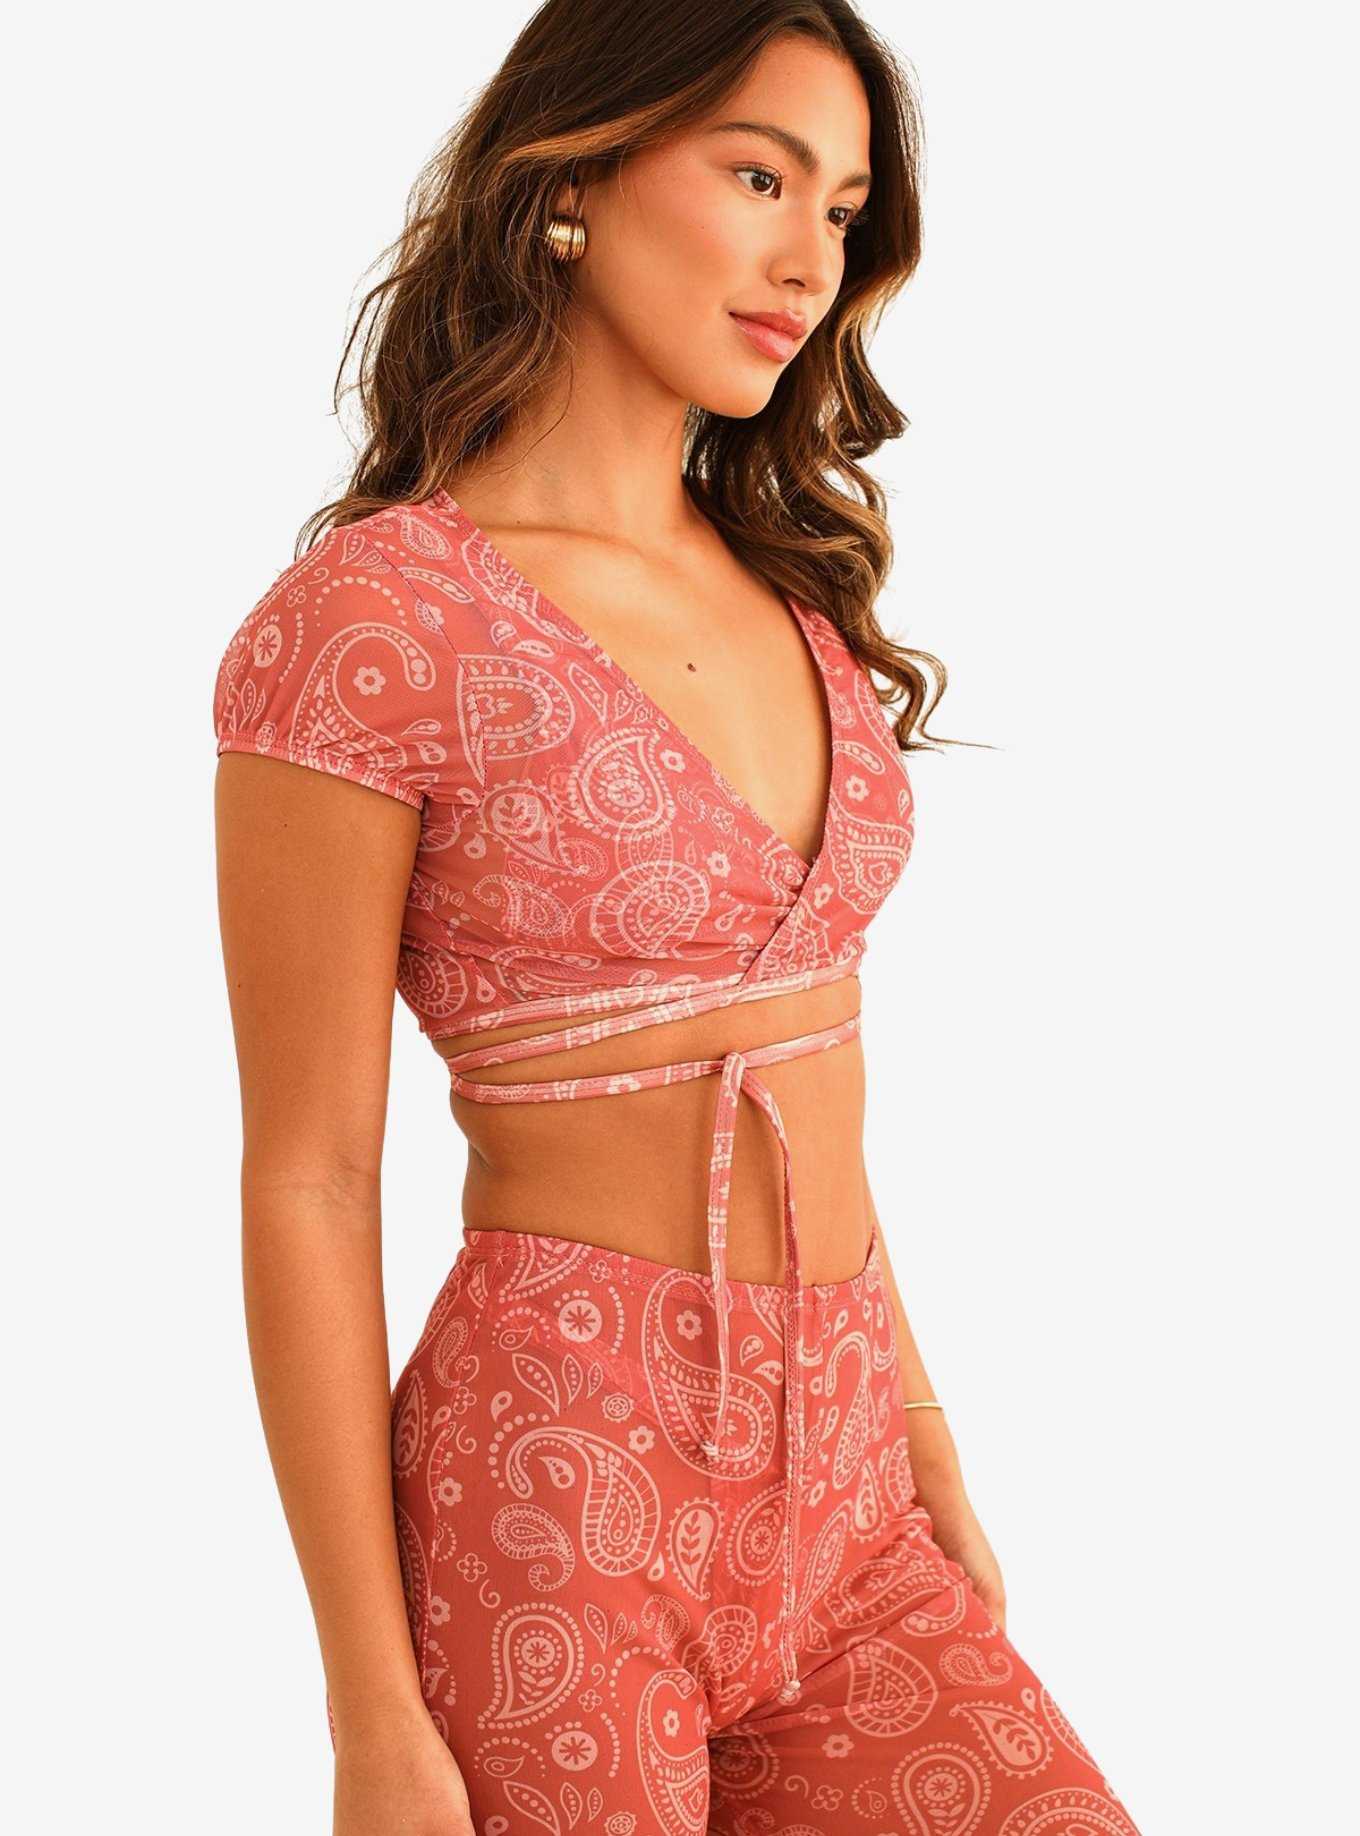 Dippin' Daisy's Cher Swim Cover-Up Top Pink Paisley, , hi-res